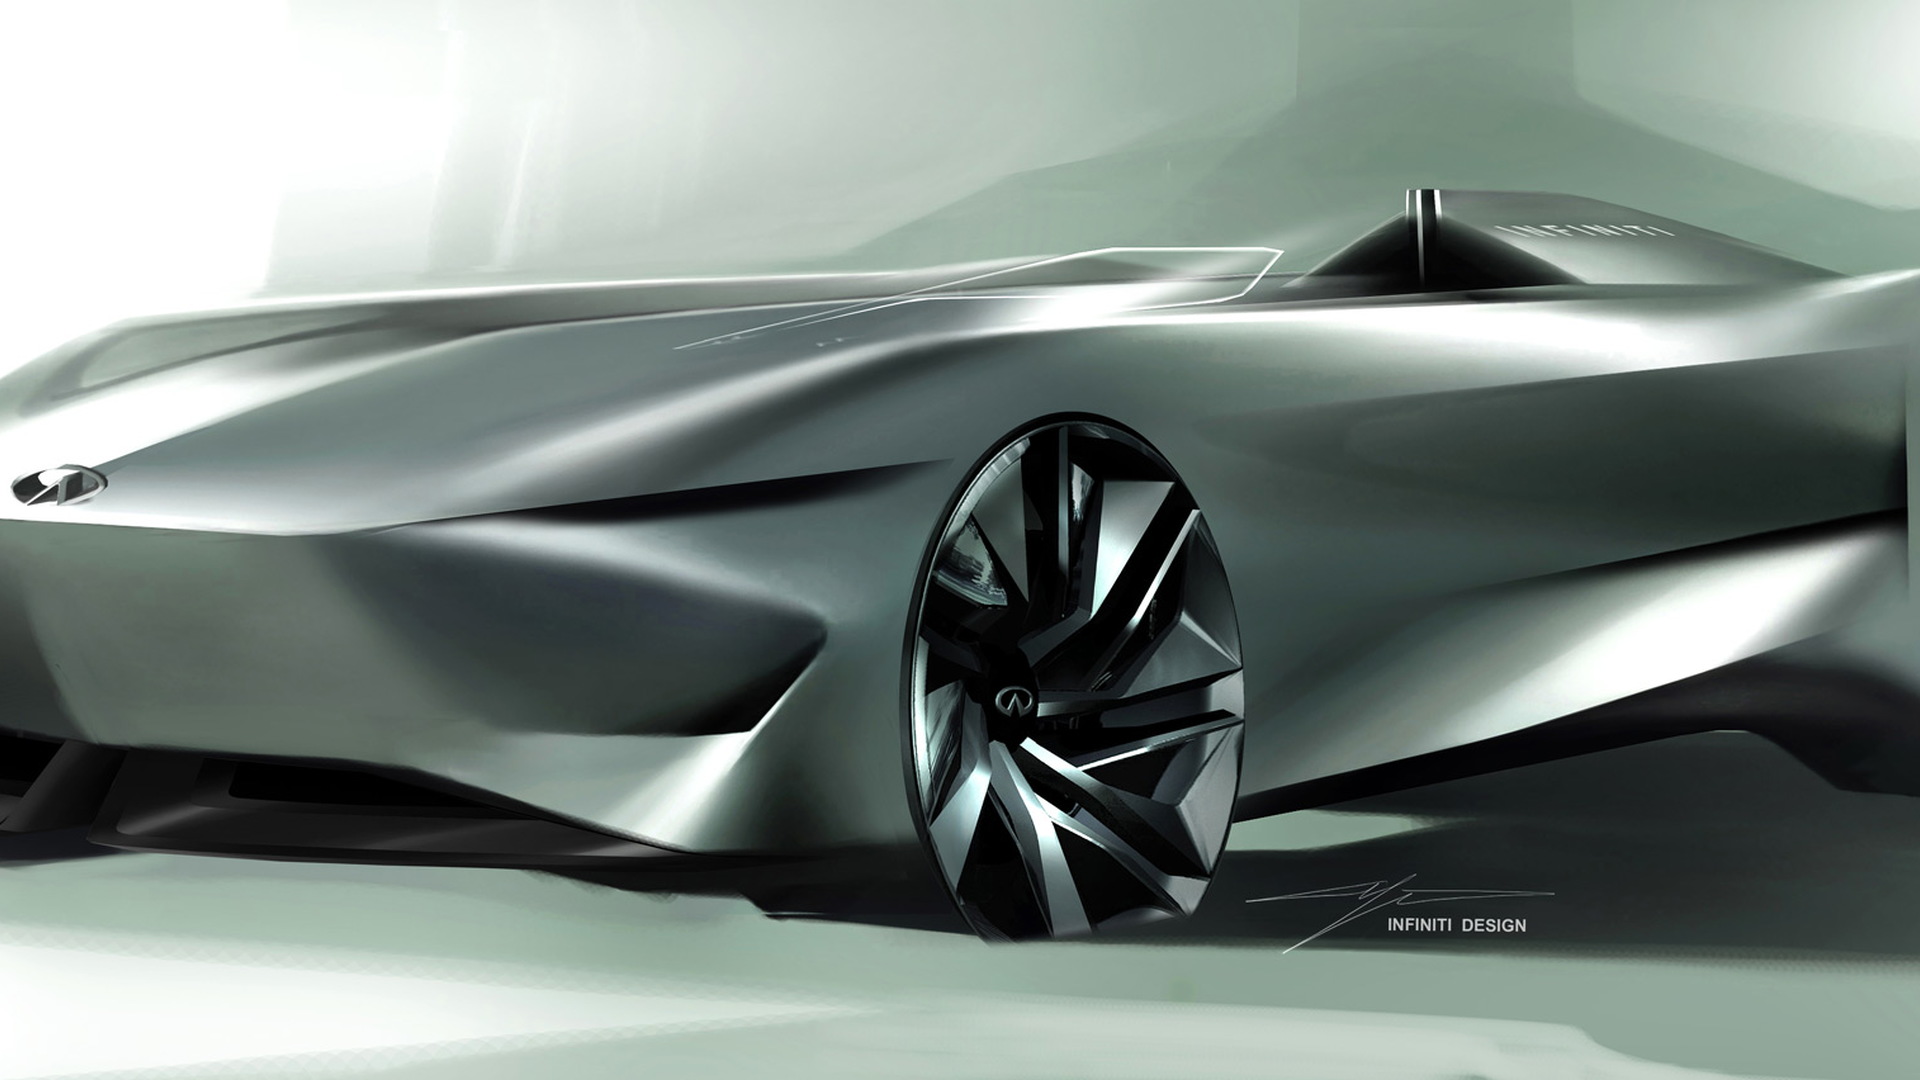 Teaser for Infiniti Prototype 10 concept debuting on August 23, 2018